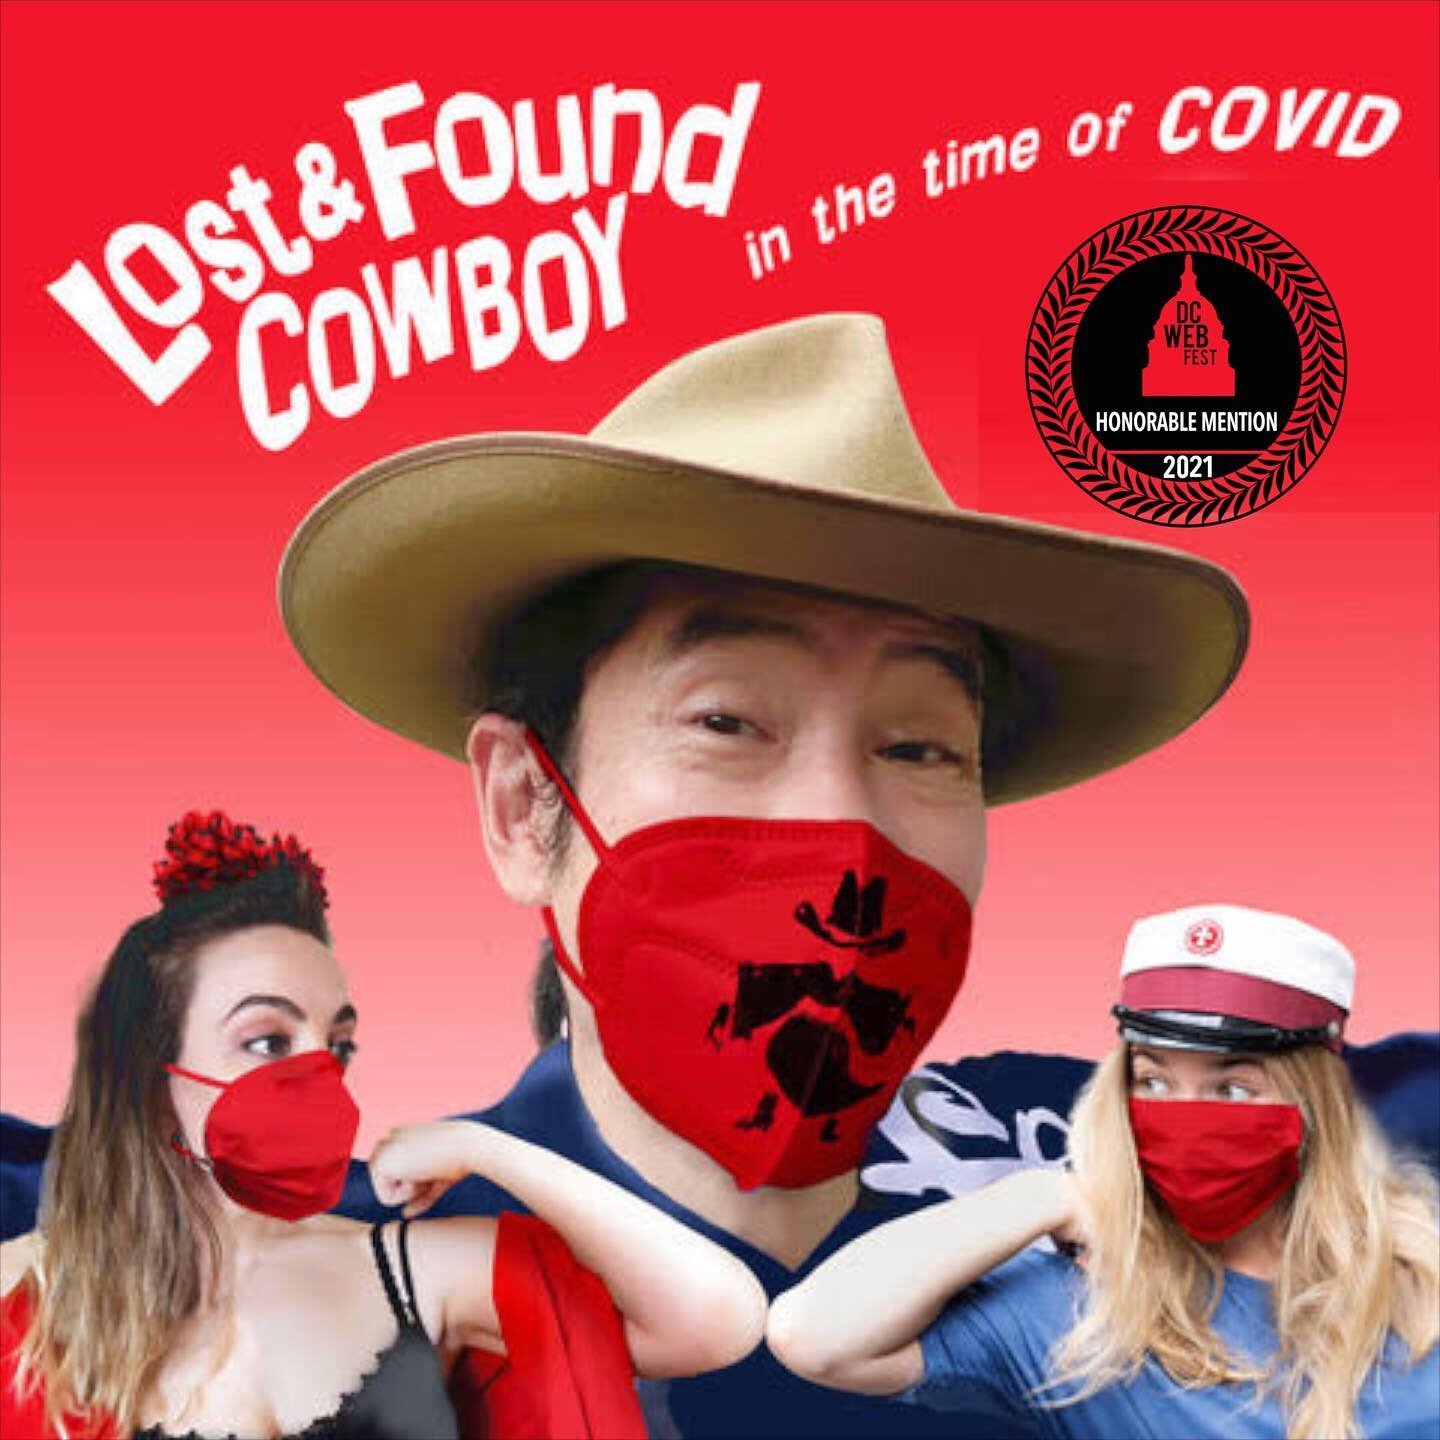 🙏🤠Thank you @dcwebfest for the selection of our trailer for Lost &amp; Found Cowboy In the Time of COVID as an Honorable Mention!
Congratulations to our co-stars @laerkeolsvig , @sta.delmar and our crew @darnsian , @motomu_ishigaki , @masatakaodaka